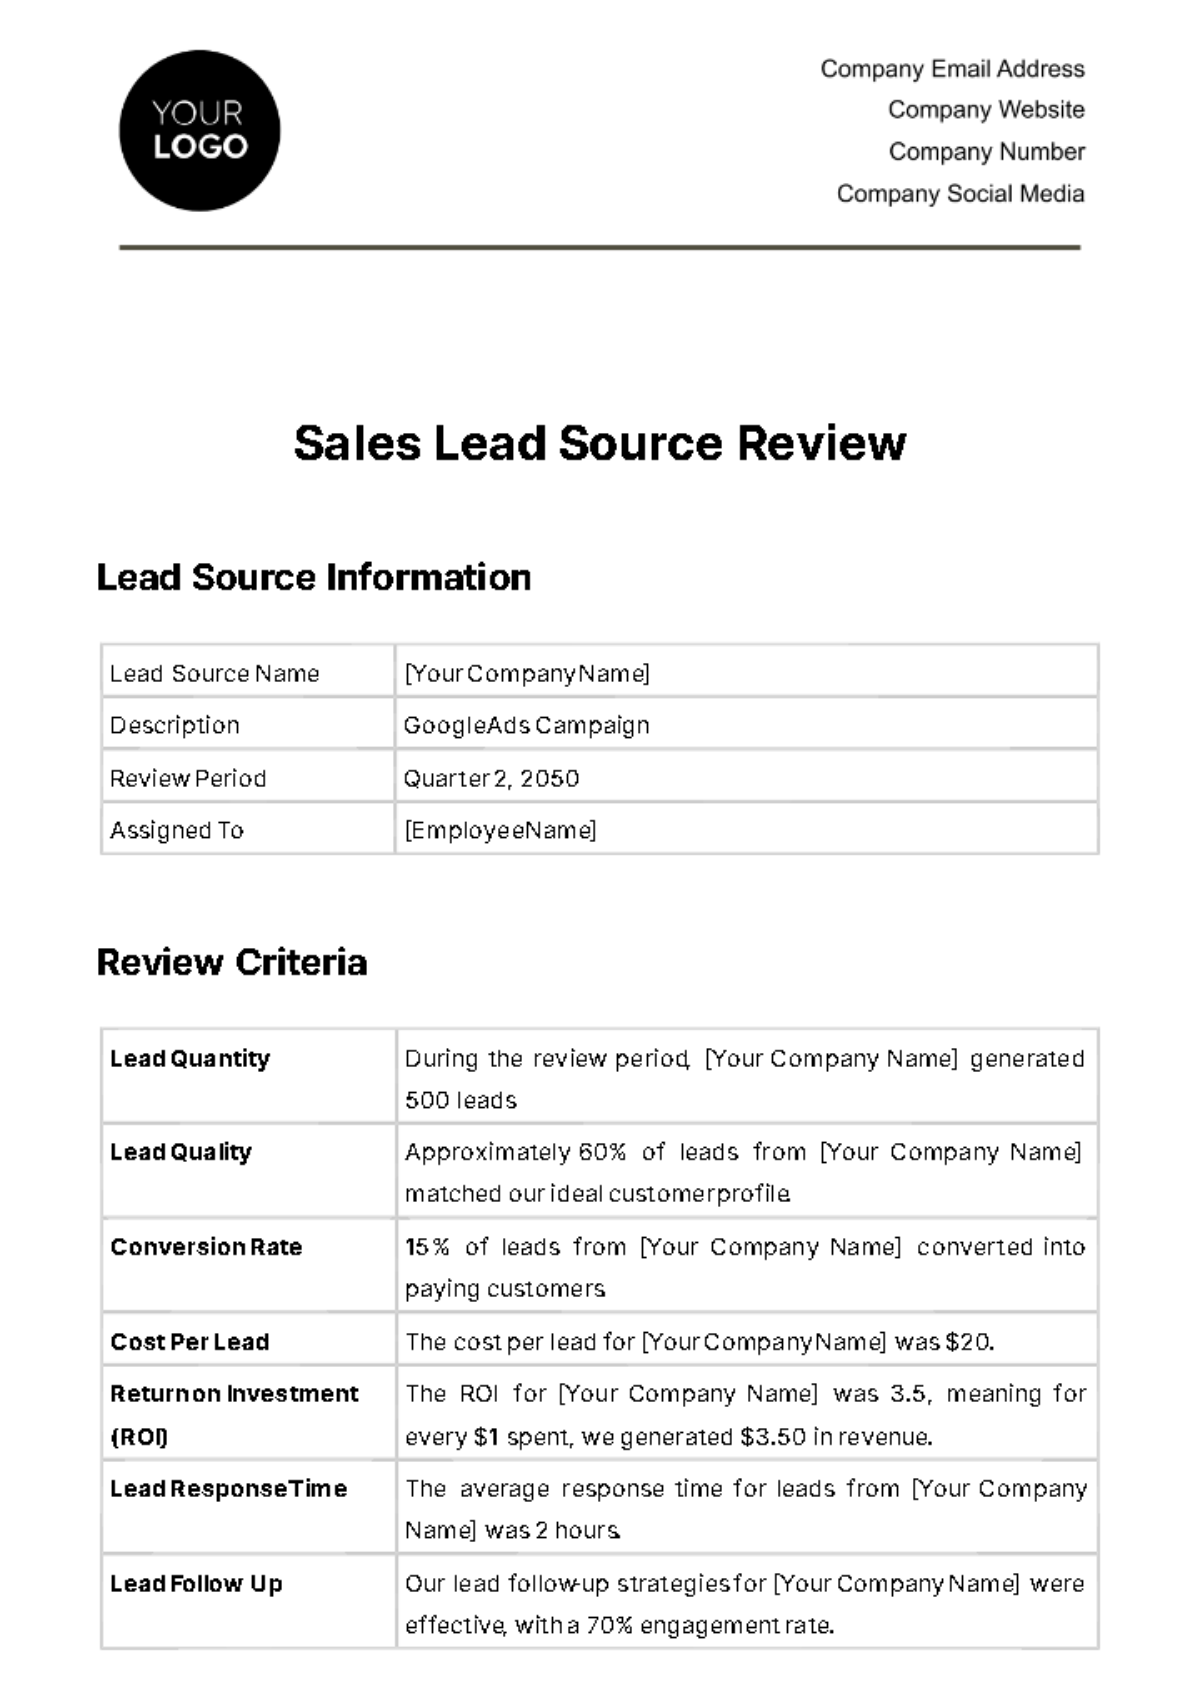 Free Sales Lead Source Review Template